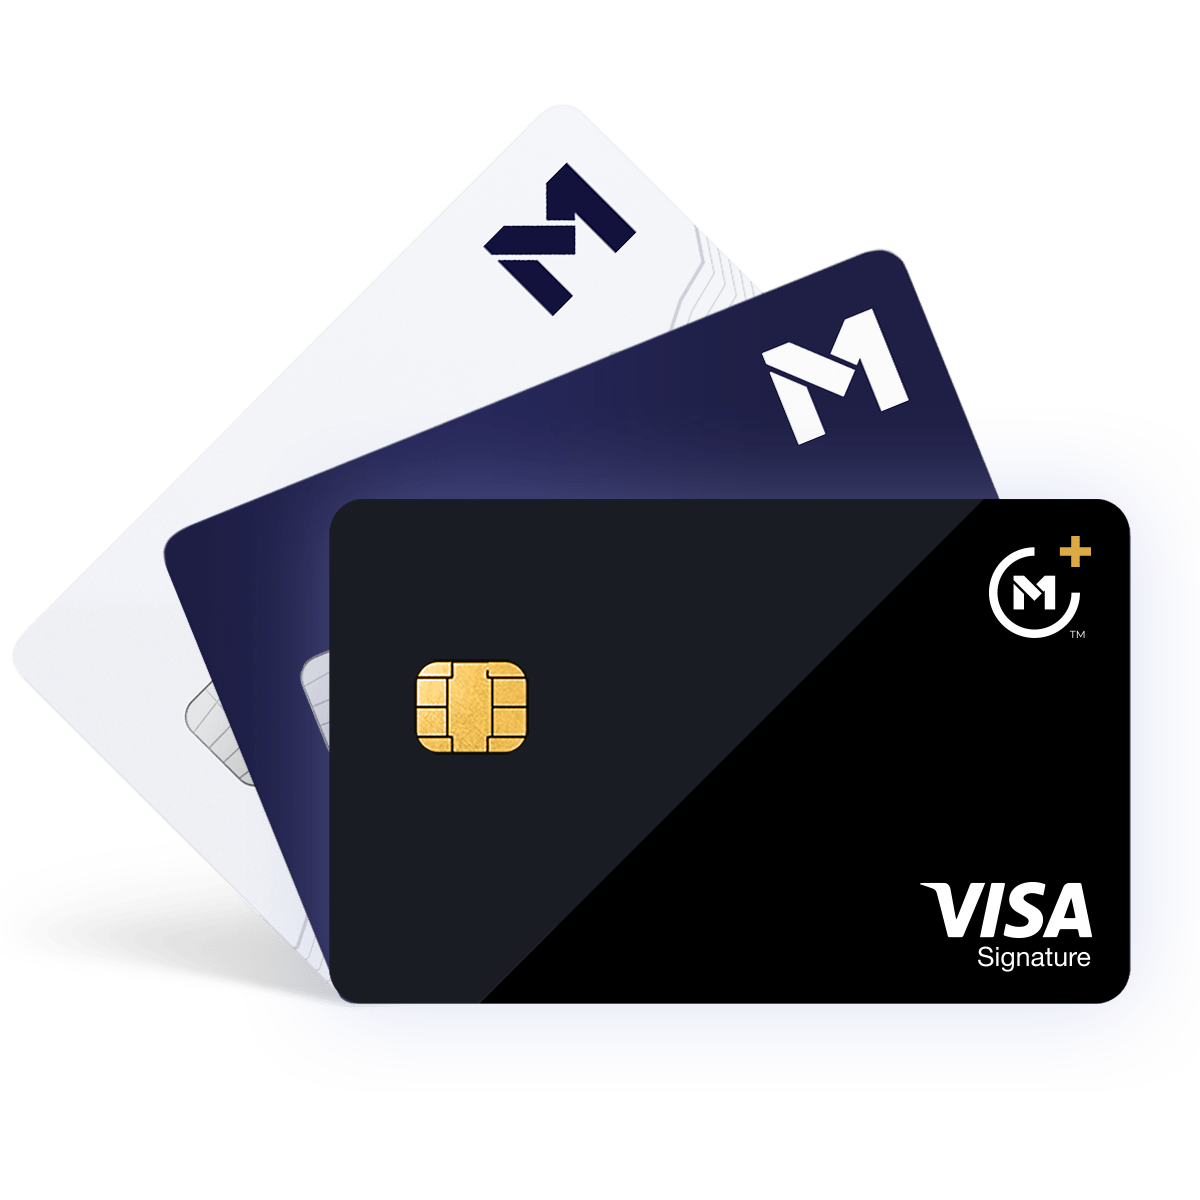 M1 Spend and The Owner's Rewards cards